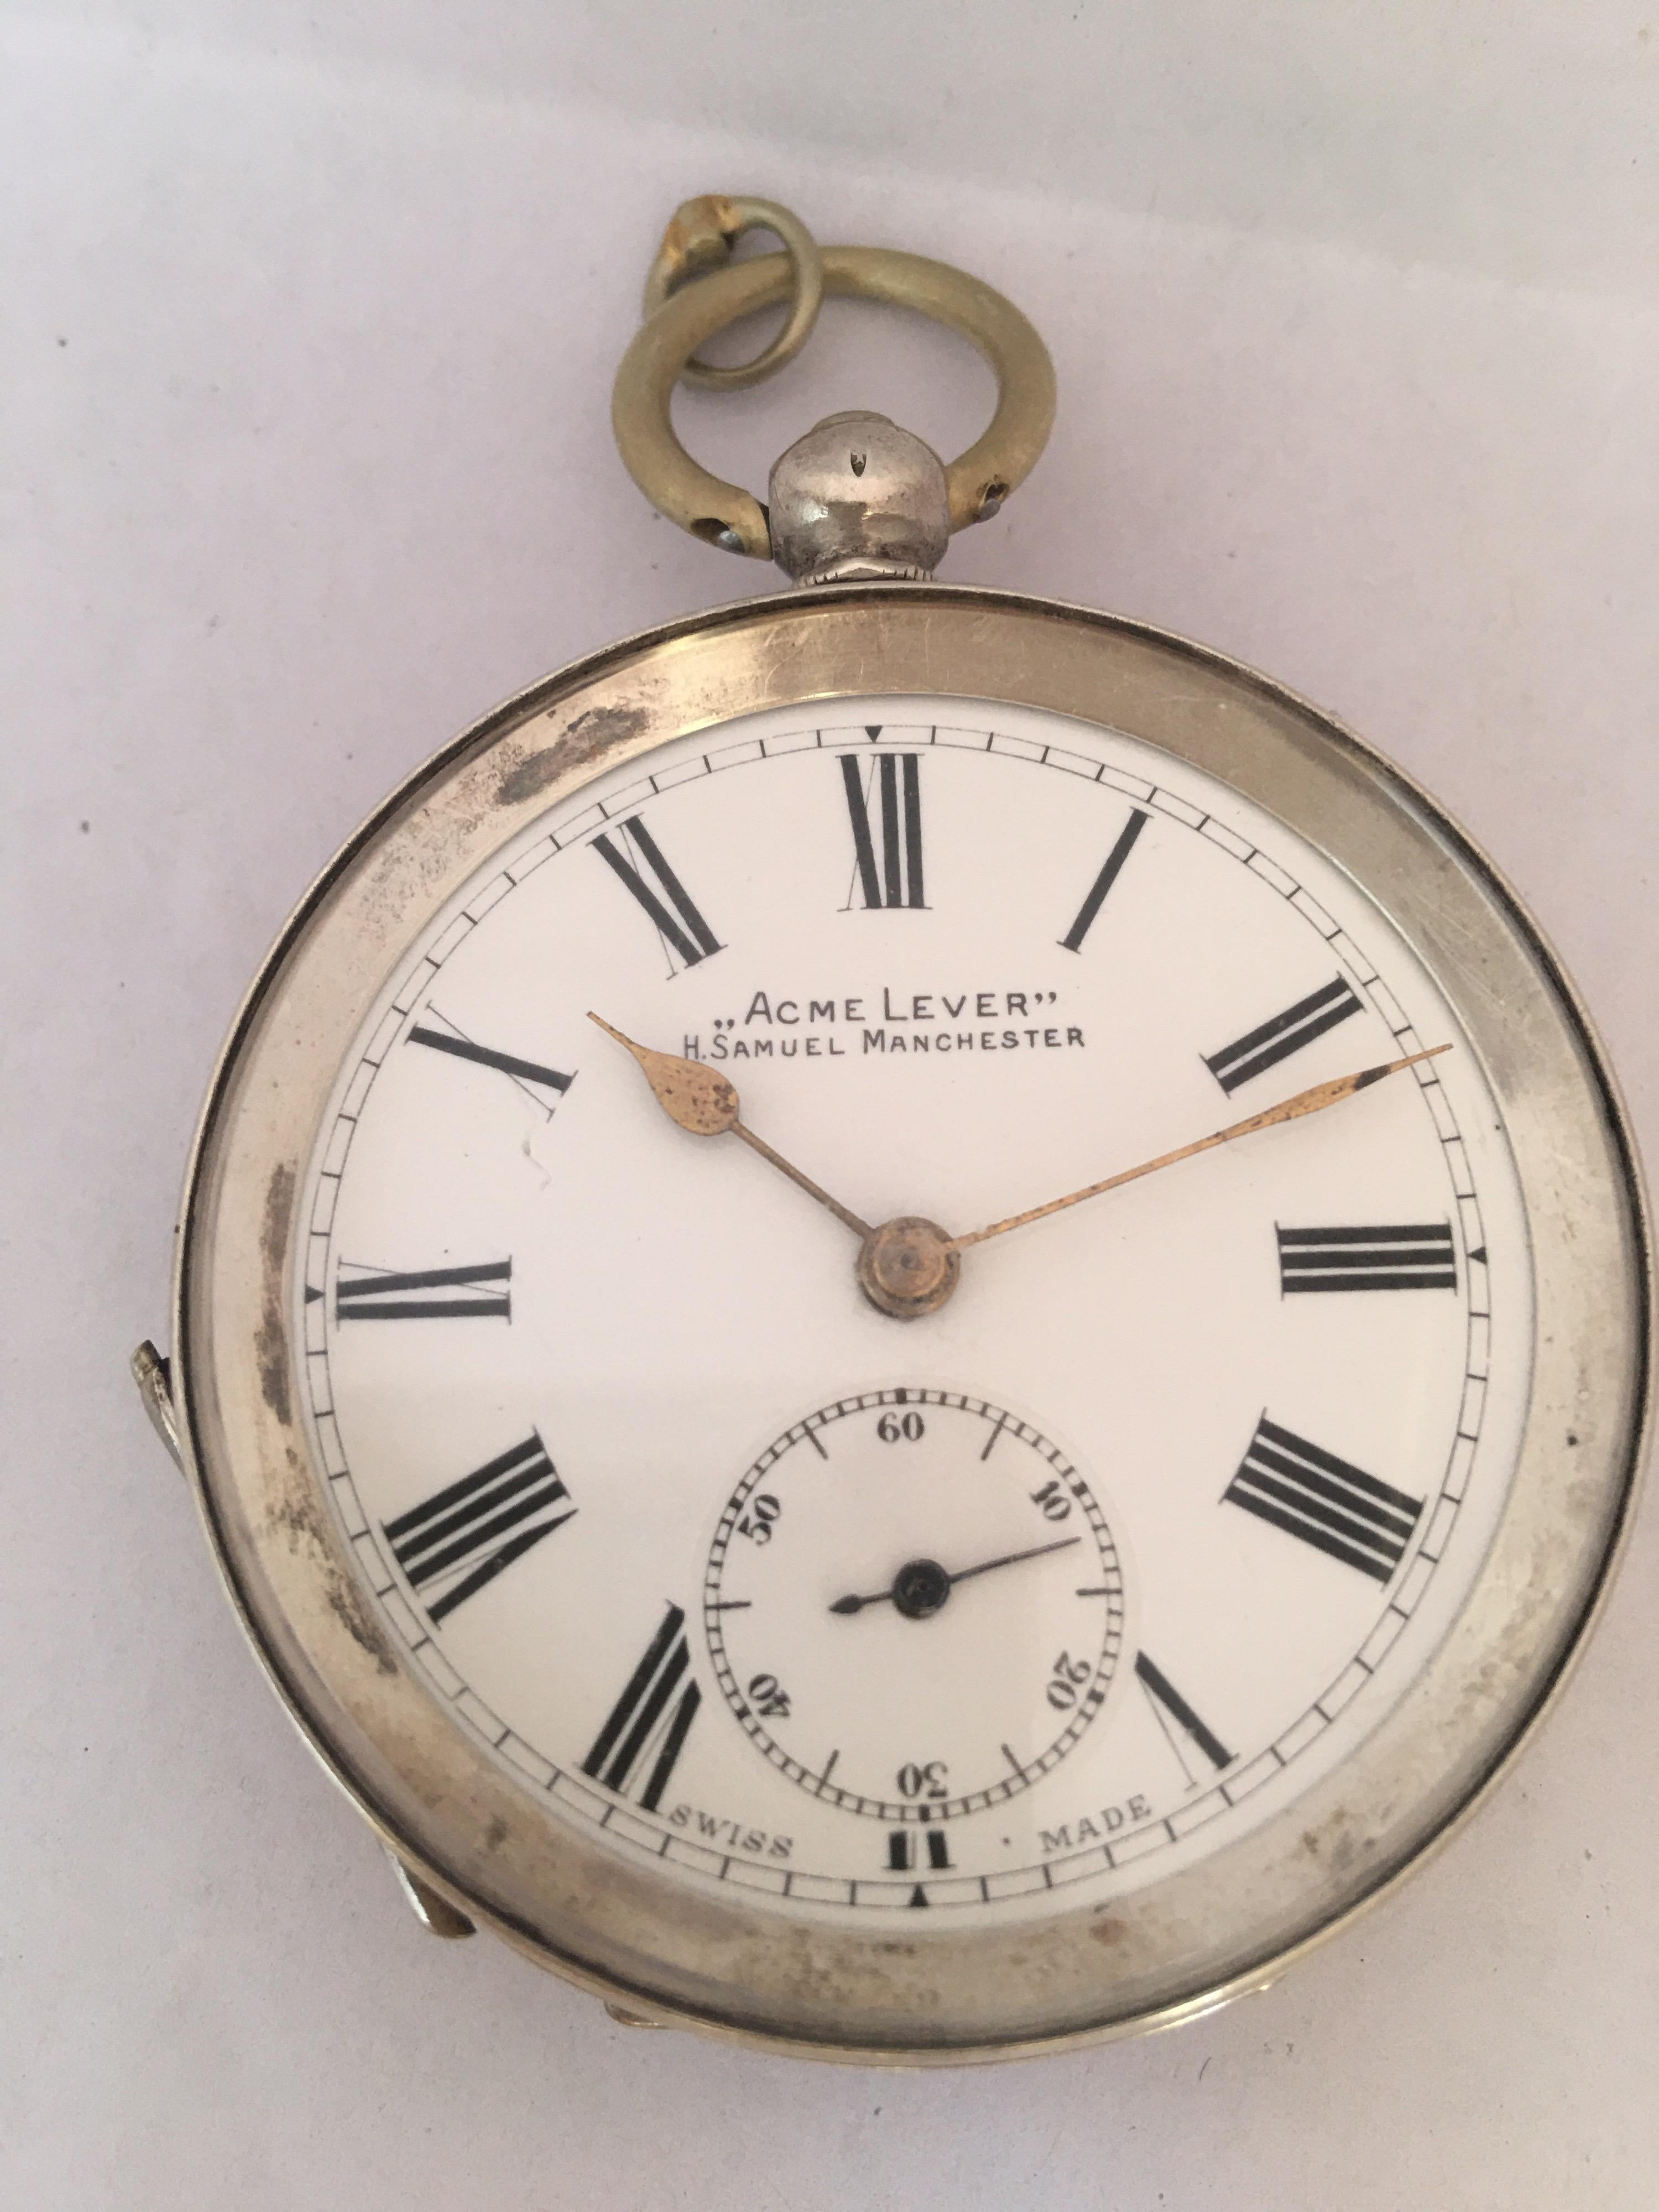 Antique Silver Key-Winding Pocket Watch Signed Acme Lever H. Samuel Manchester 7